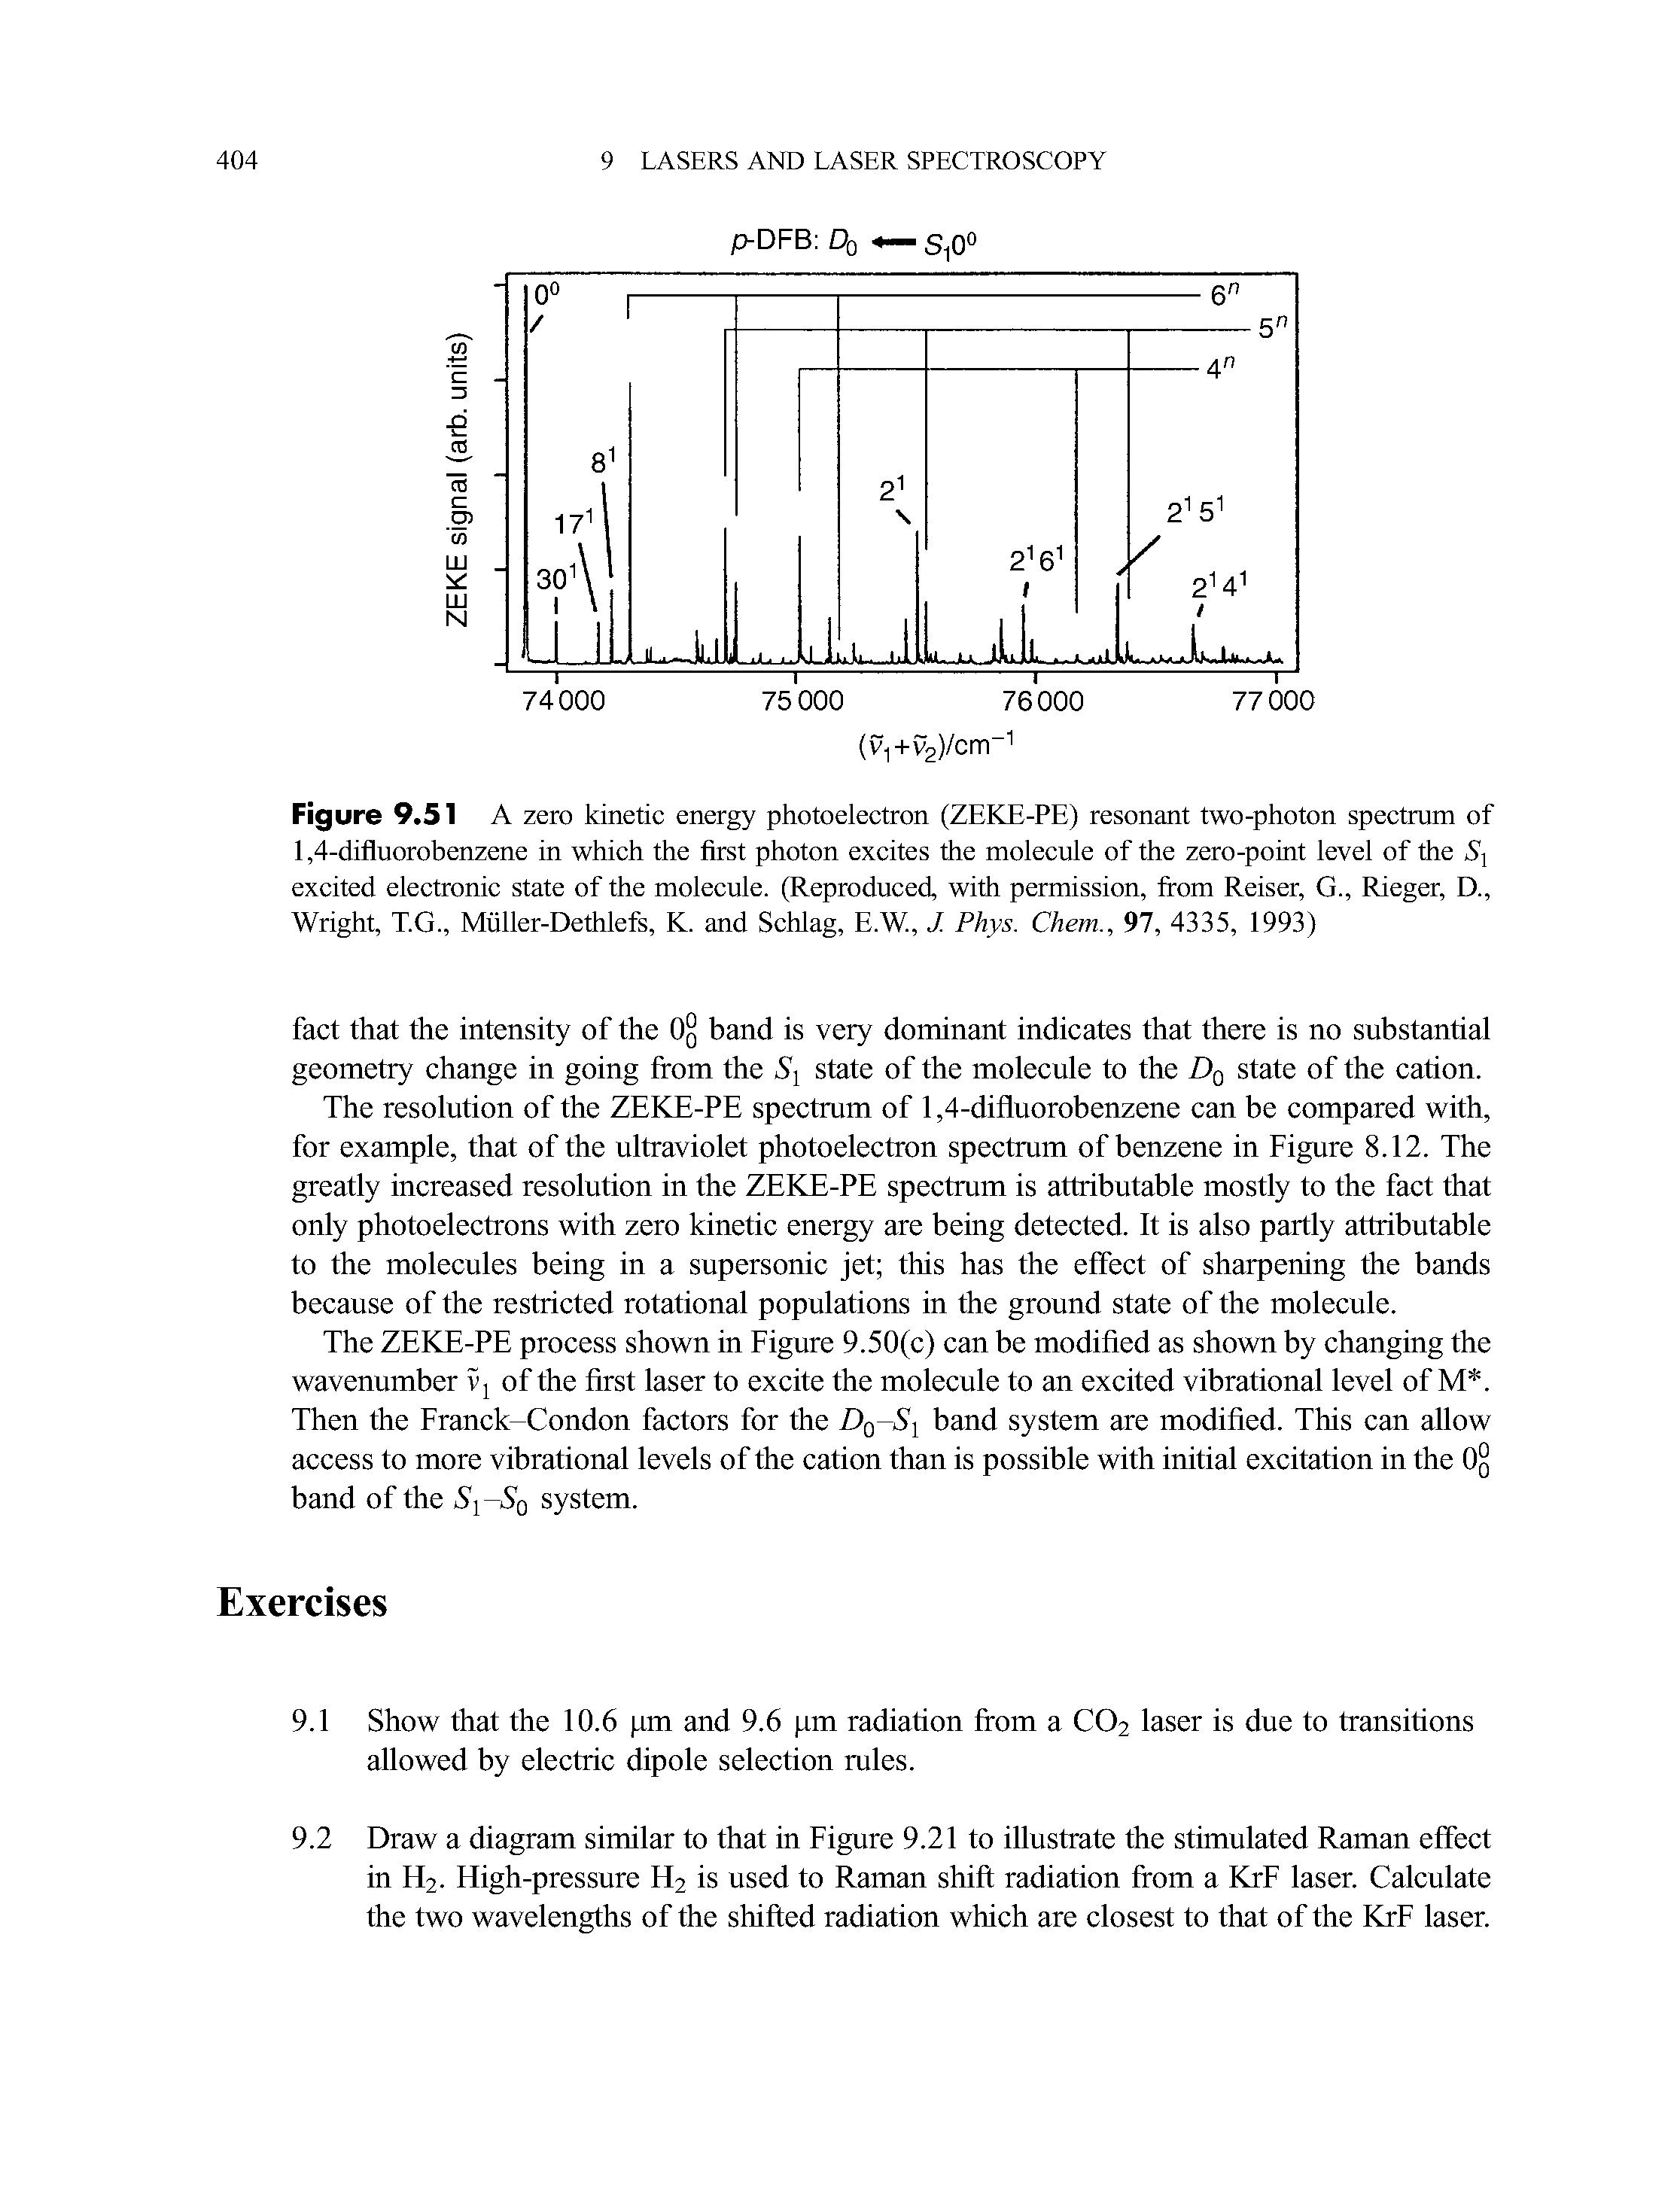 Figure 9.51 A zero kinetic energy photoelectron (ZEKE-PE) resonant two-photon spectrum of 1,4-difluorobenzene in which the first photon excites the molecule of the zero-point level of the S-[ excited electronic state of the molecule. (Reproduced, with permission, from Reiser, G., Rieger, D., Wright, T.G., Muller-Dethlefs, K. and Schlag, E.W., J. Phys. Chem., 97, 4335, 1993)...